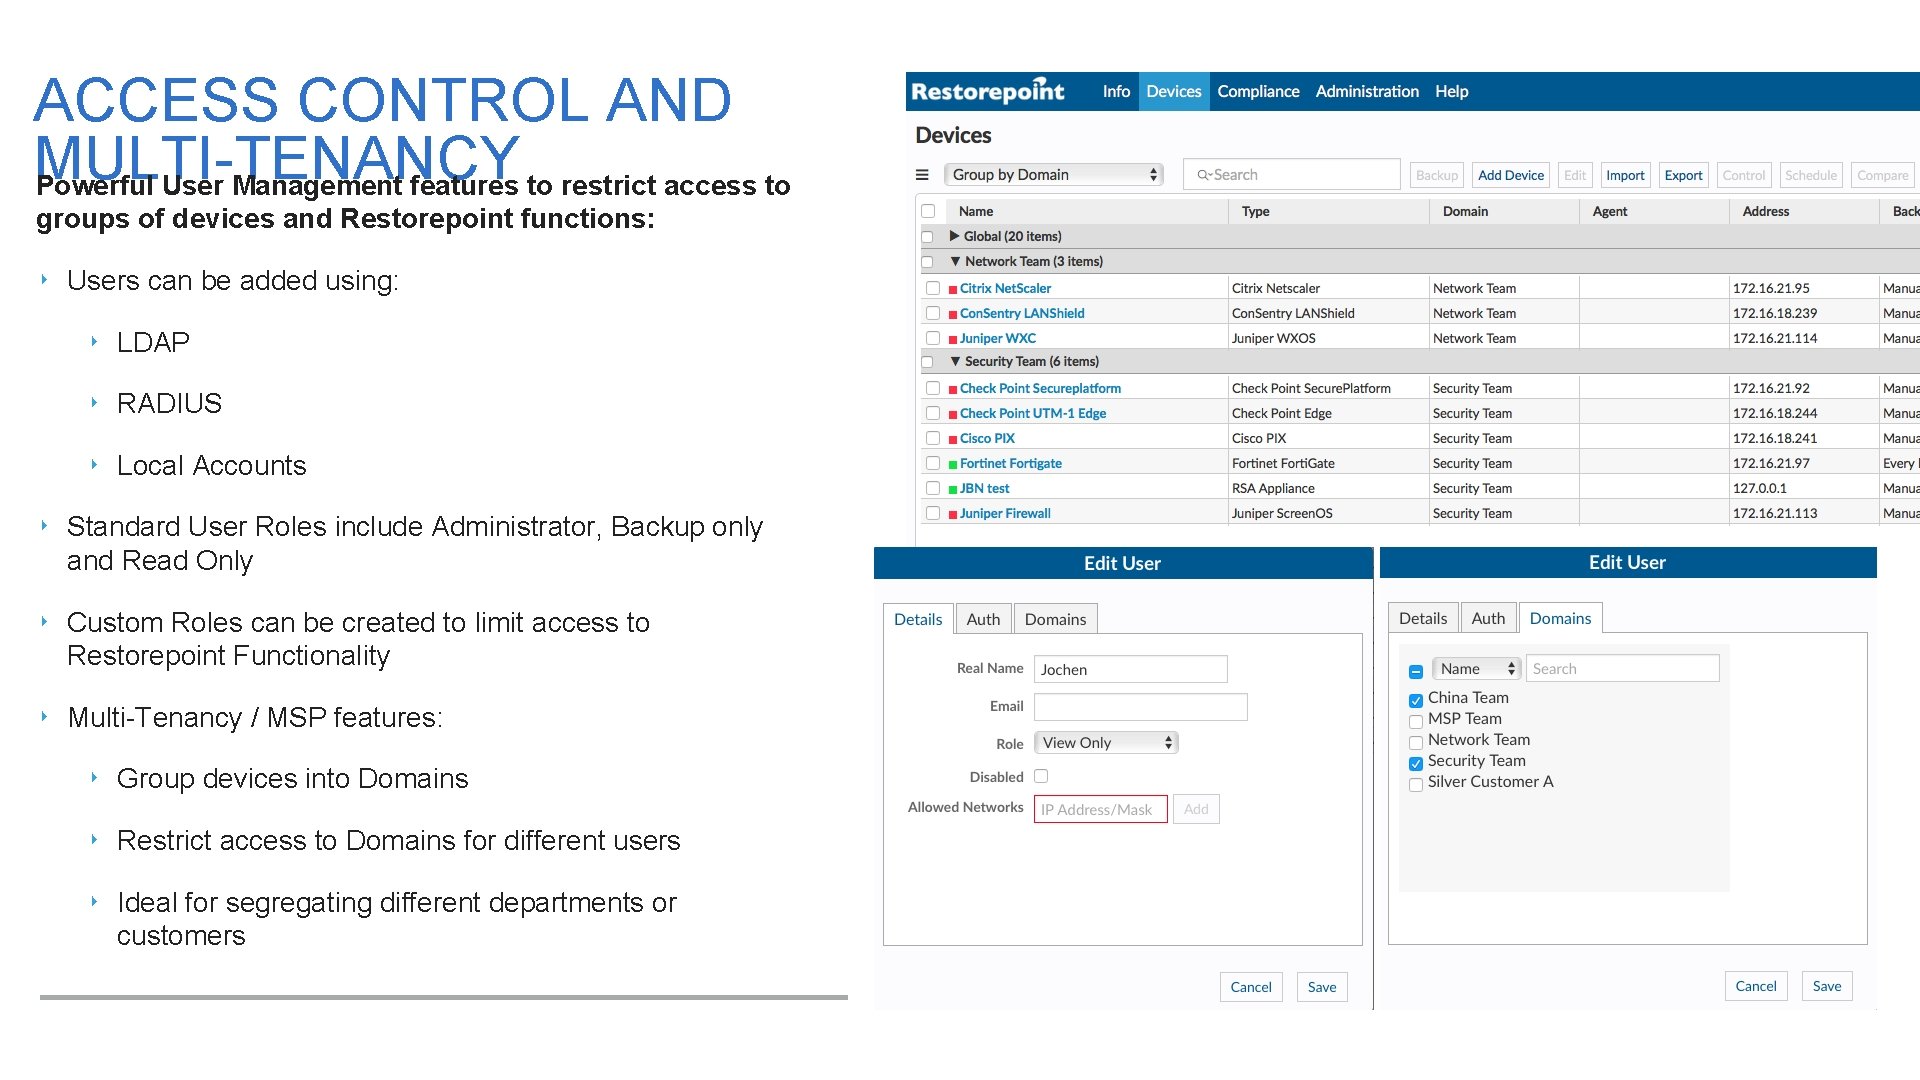 ACCESS CONTROL AND MULTI-TENANCY Powerful User Management features to restrict access to groups of